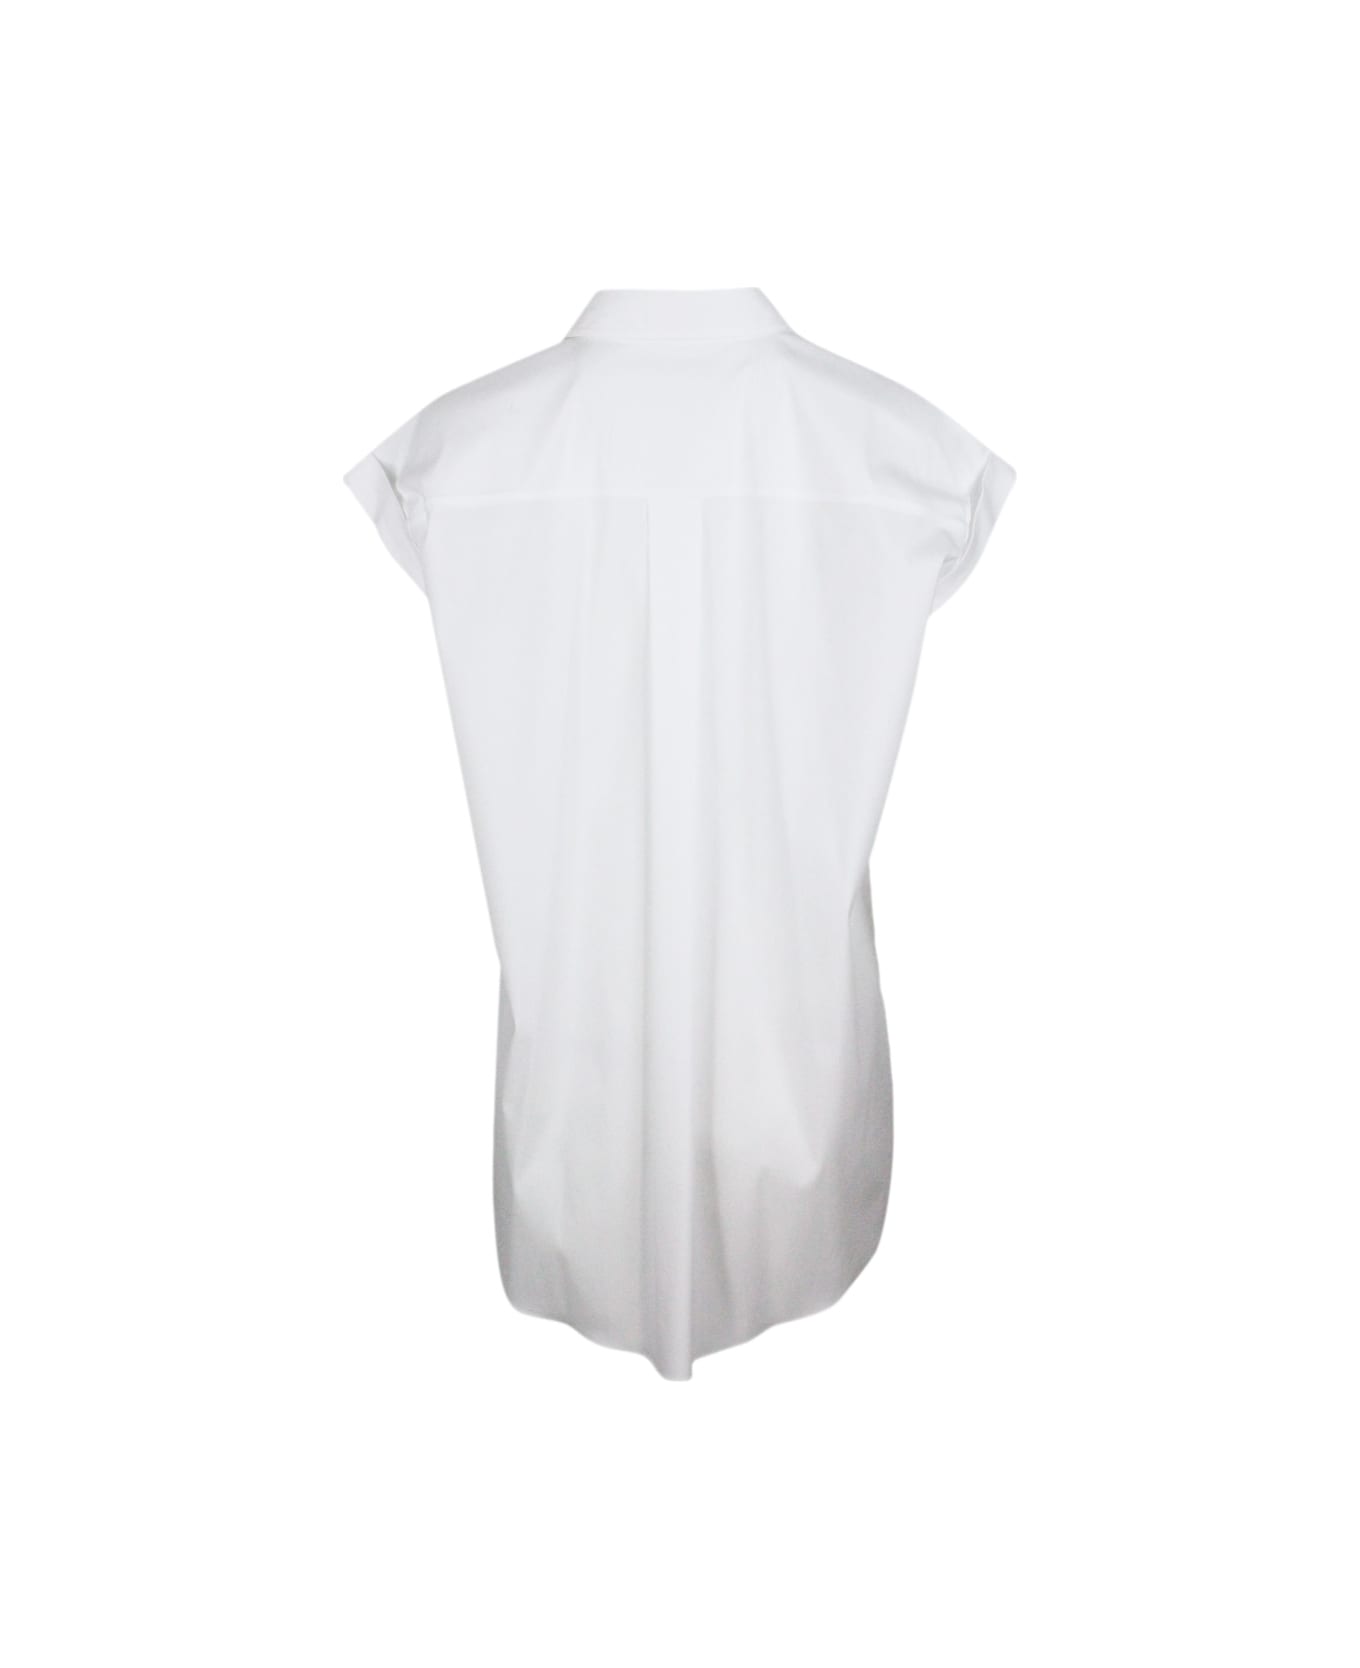 Brunello Cucinelli Sleeveless Shirt With Front Pockets Embellished With Shiny Jewels - White